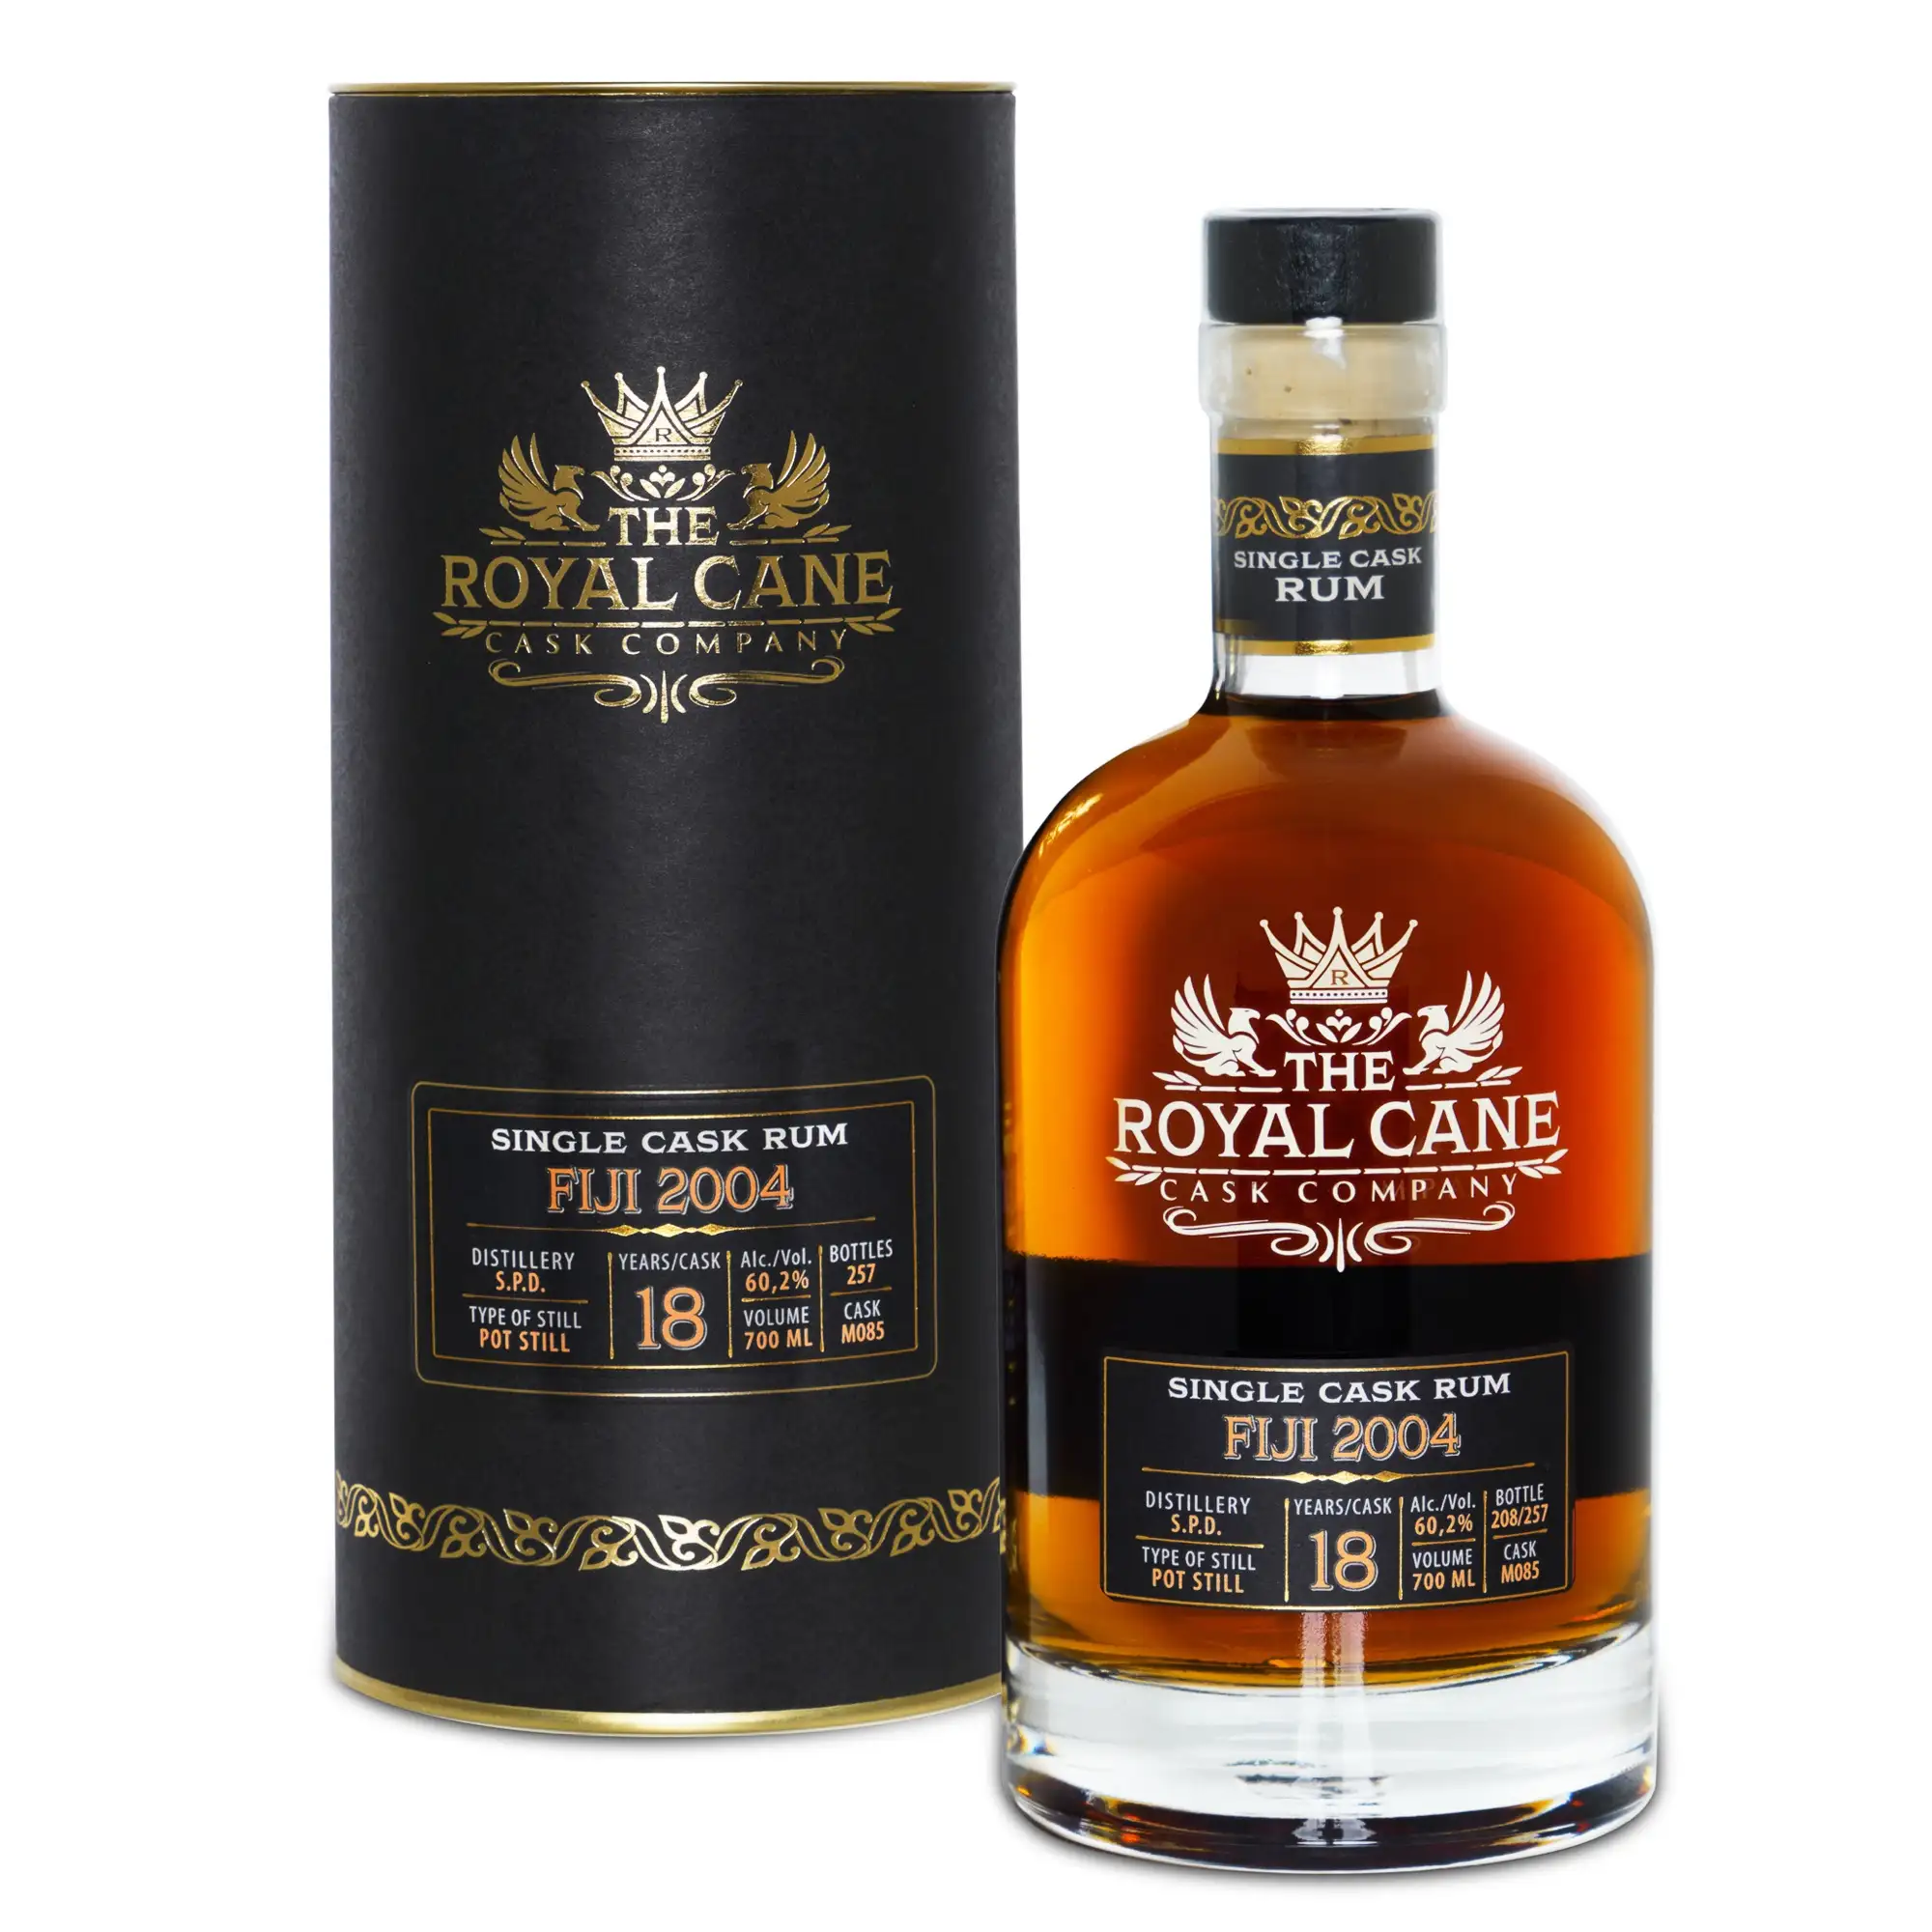 Image of the front of the bottle of the rum The Royal Cane Cask Company Fiji SPD